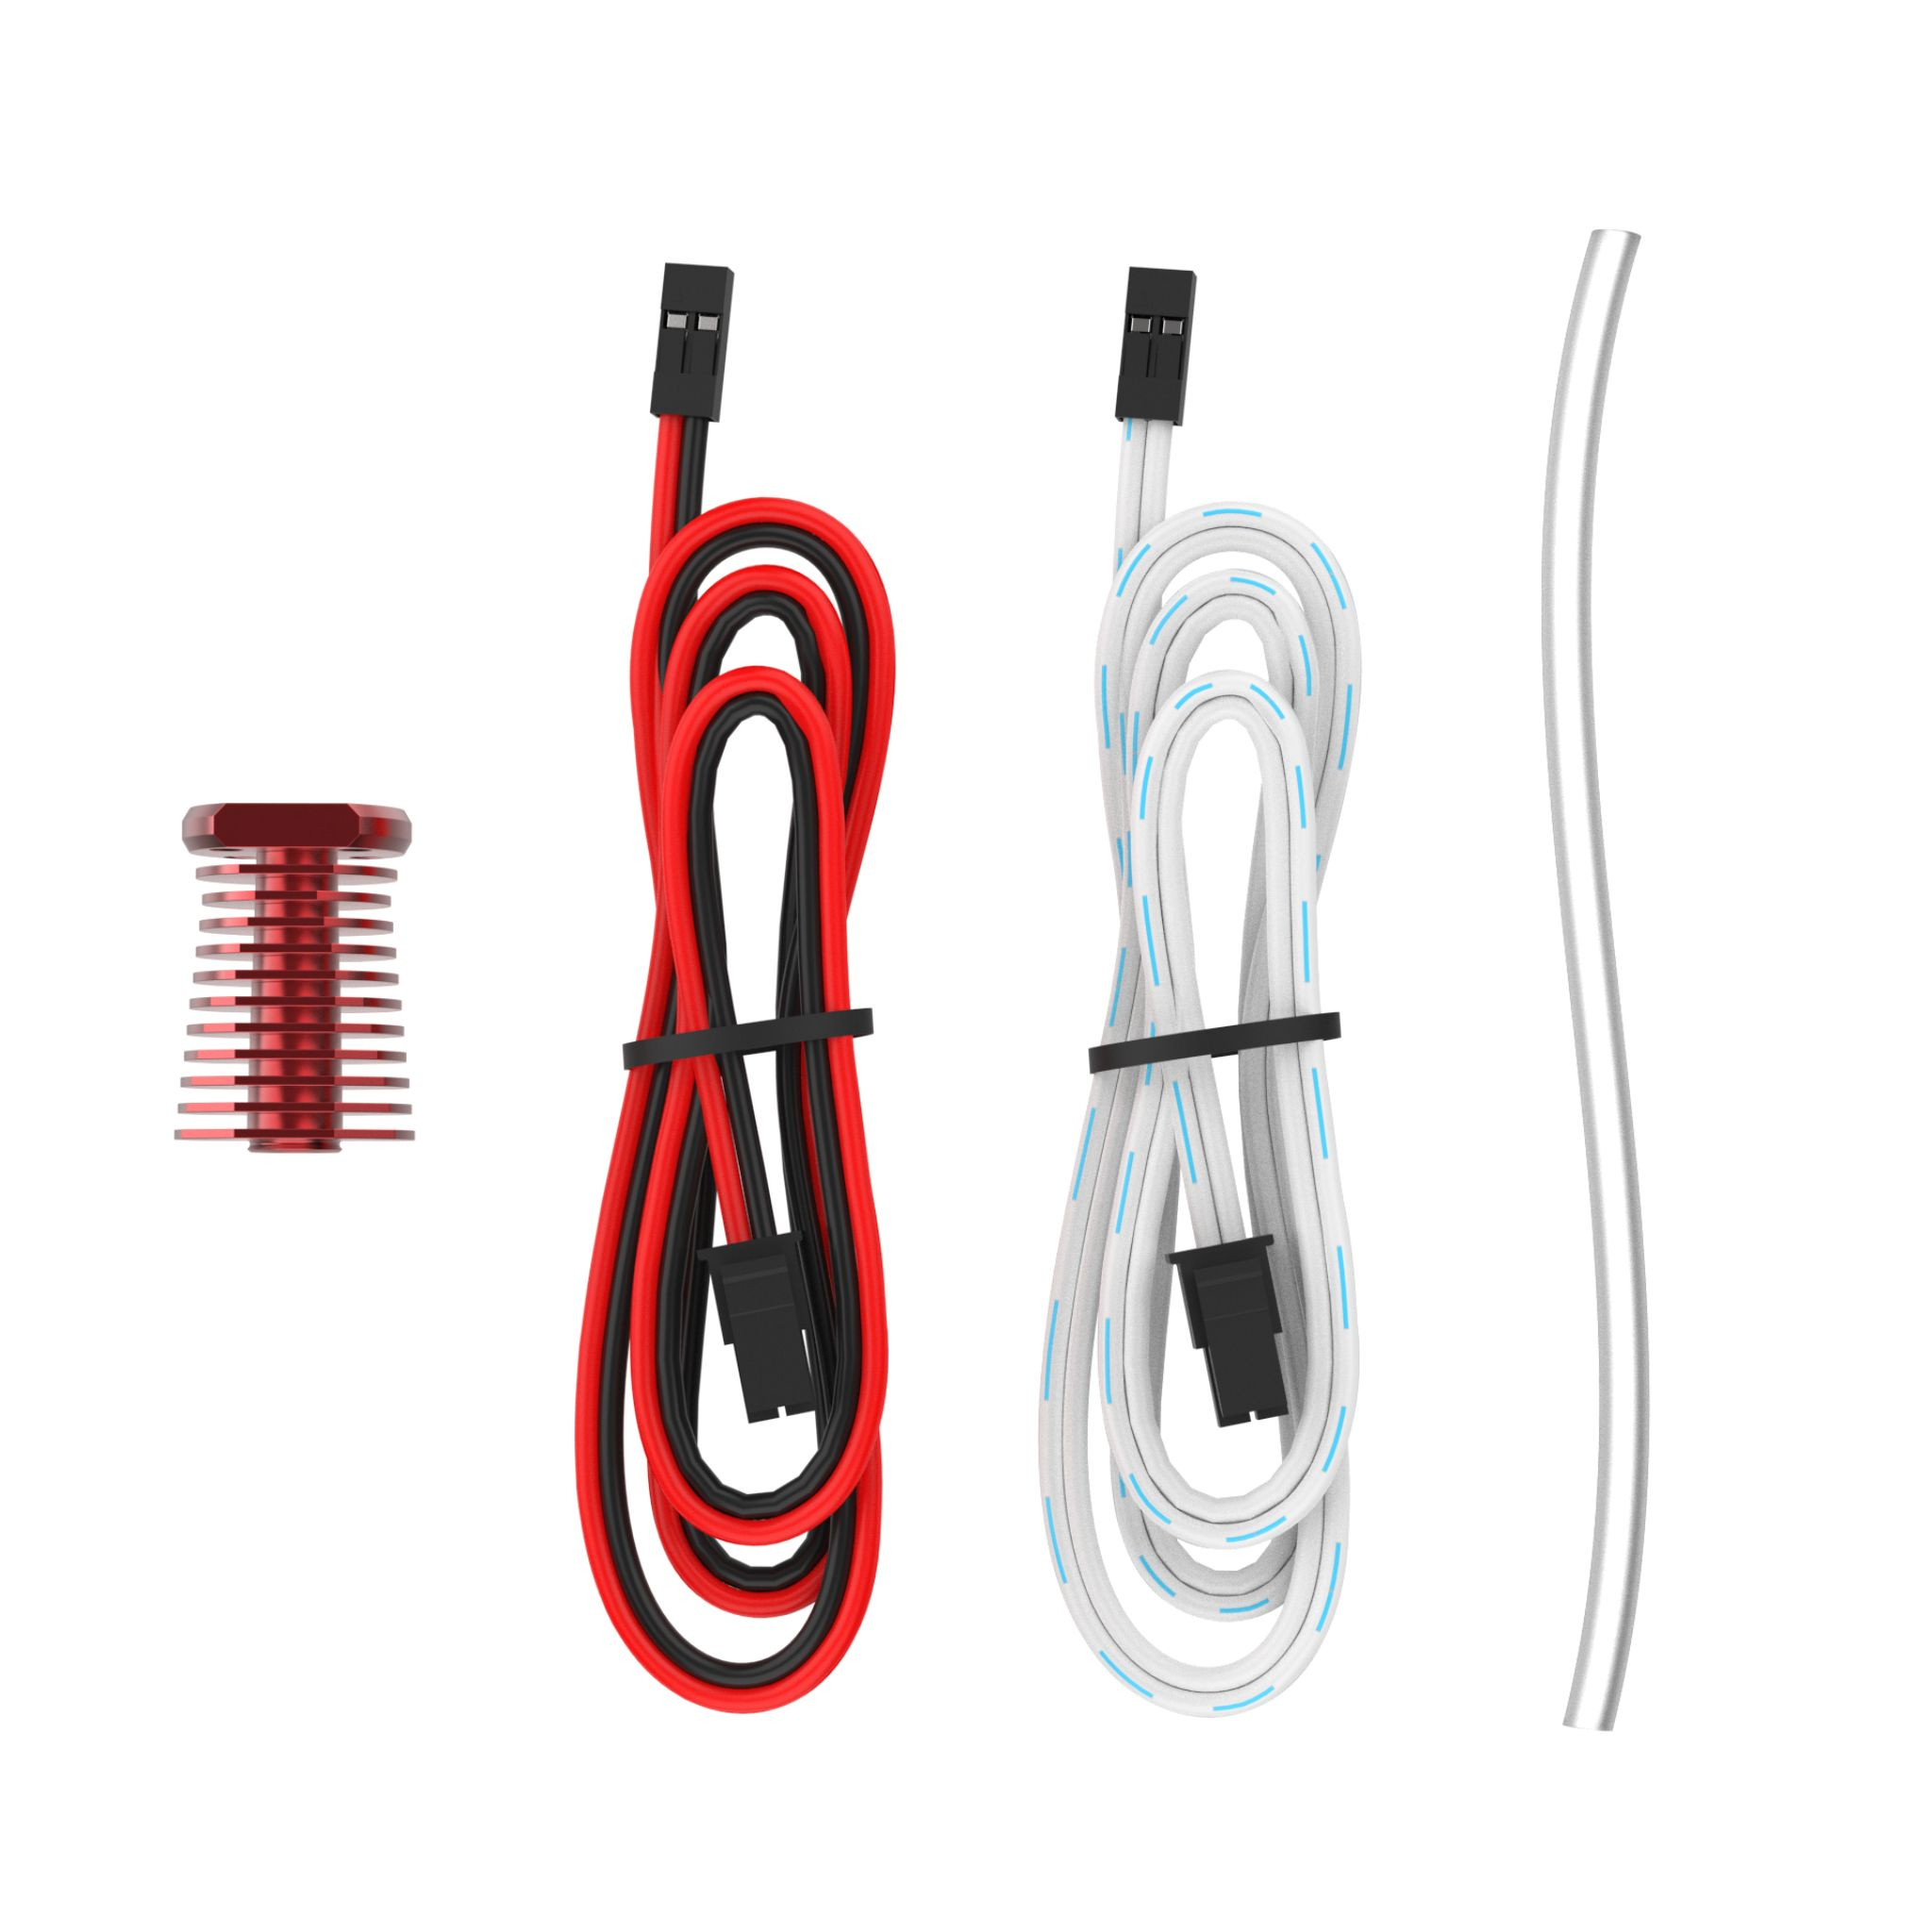 A set of electronic components including a small red cylindrical module with multiple ridges, a black and red twisted wire, a white and light blue twisted wire, and a single clear tube. Ideal for Voron 3D printer assembly, each wire is bundled with a black fastener. The E3D Voron Coldside by E3D is perfect for this setup.